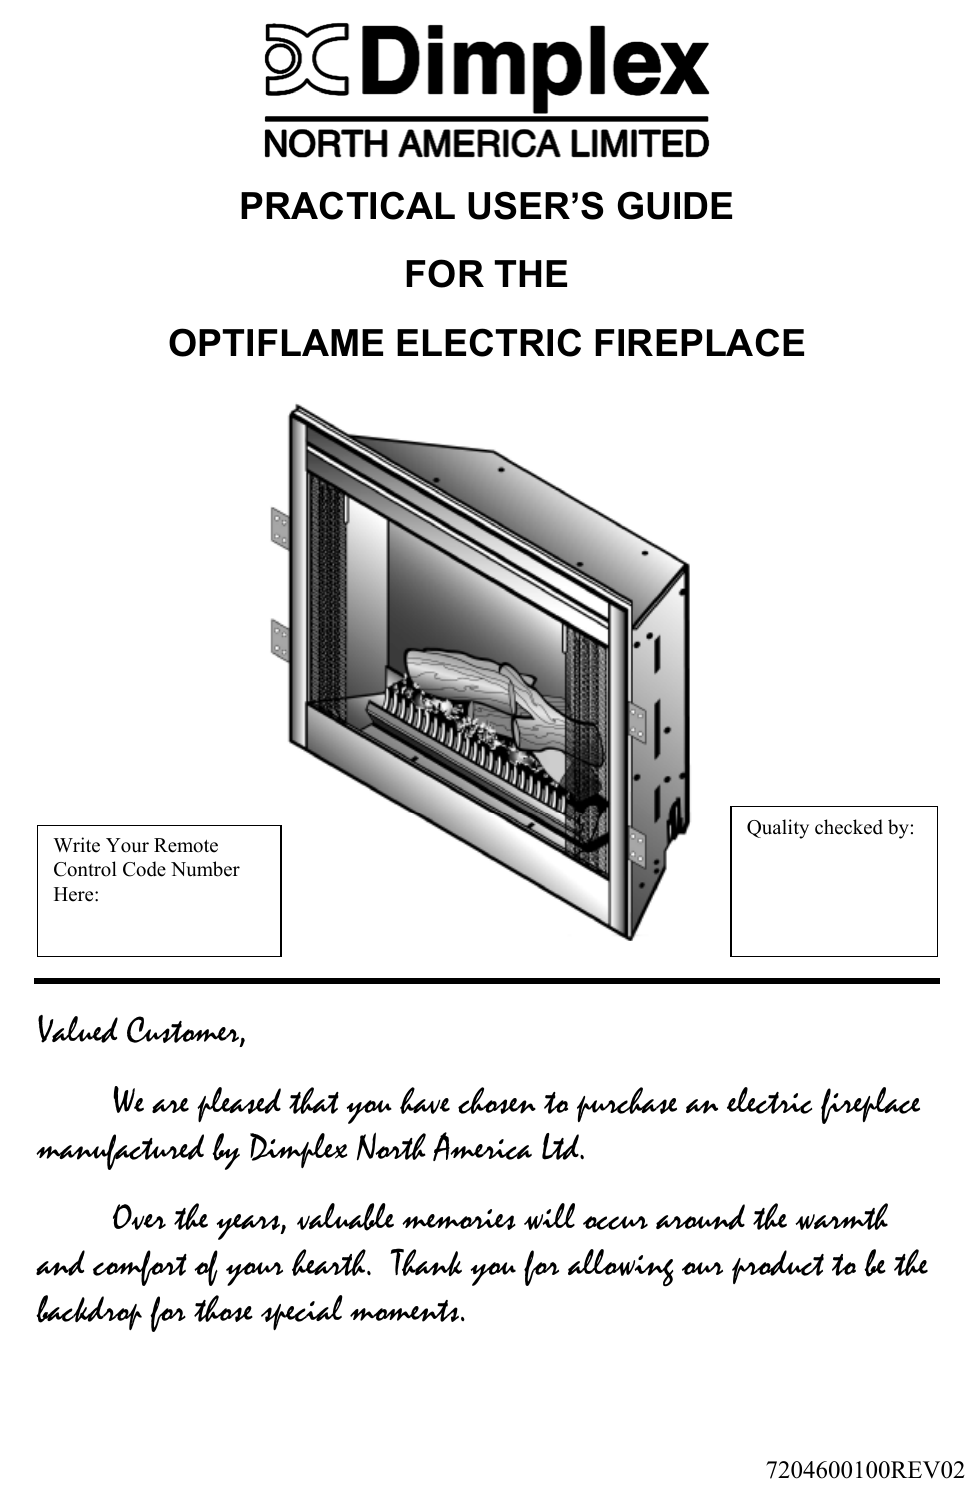 Dimplex Electric Fireplace Users Manual, Dimplex Electric Fireplace Manuals